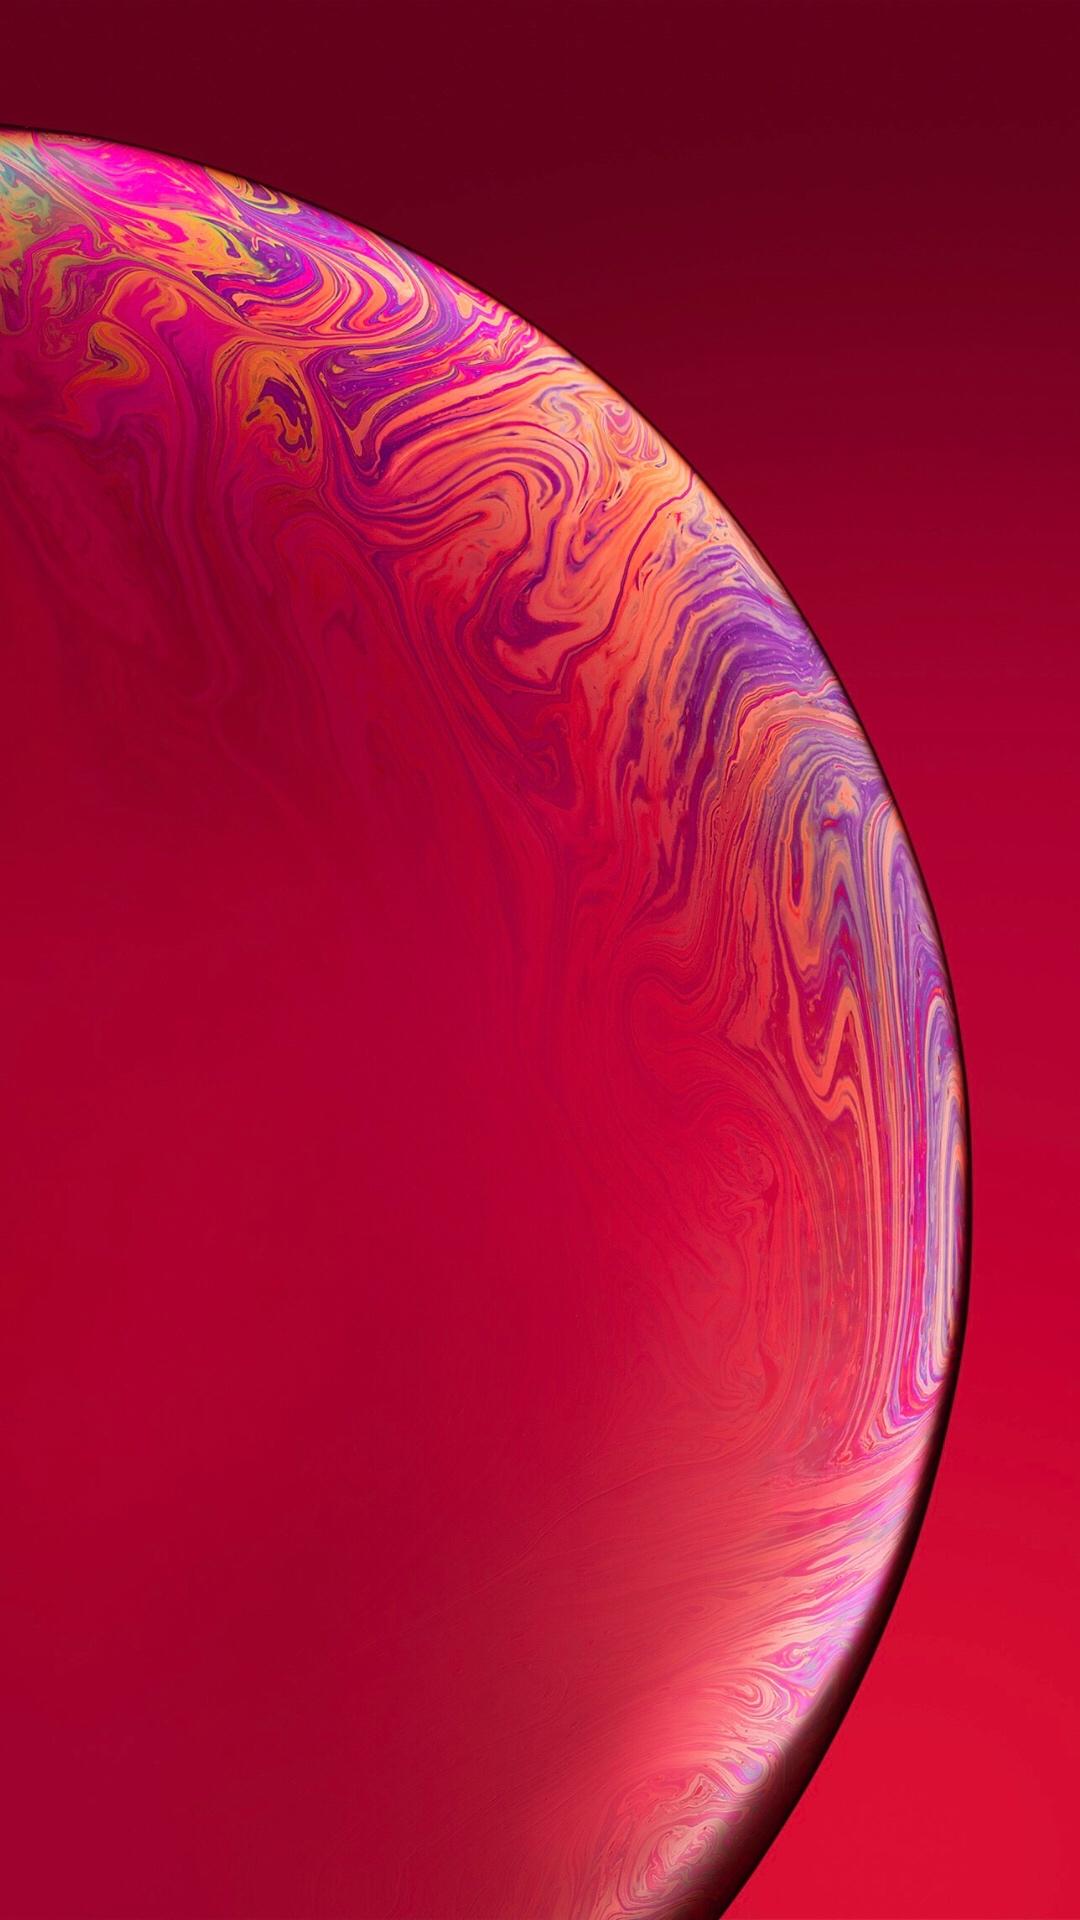 iPhone XS Max Wallpapers - Top Free